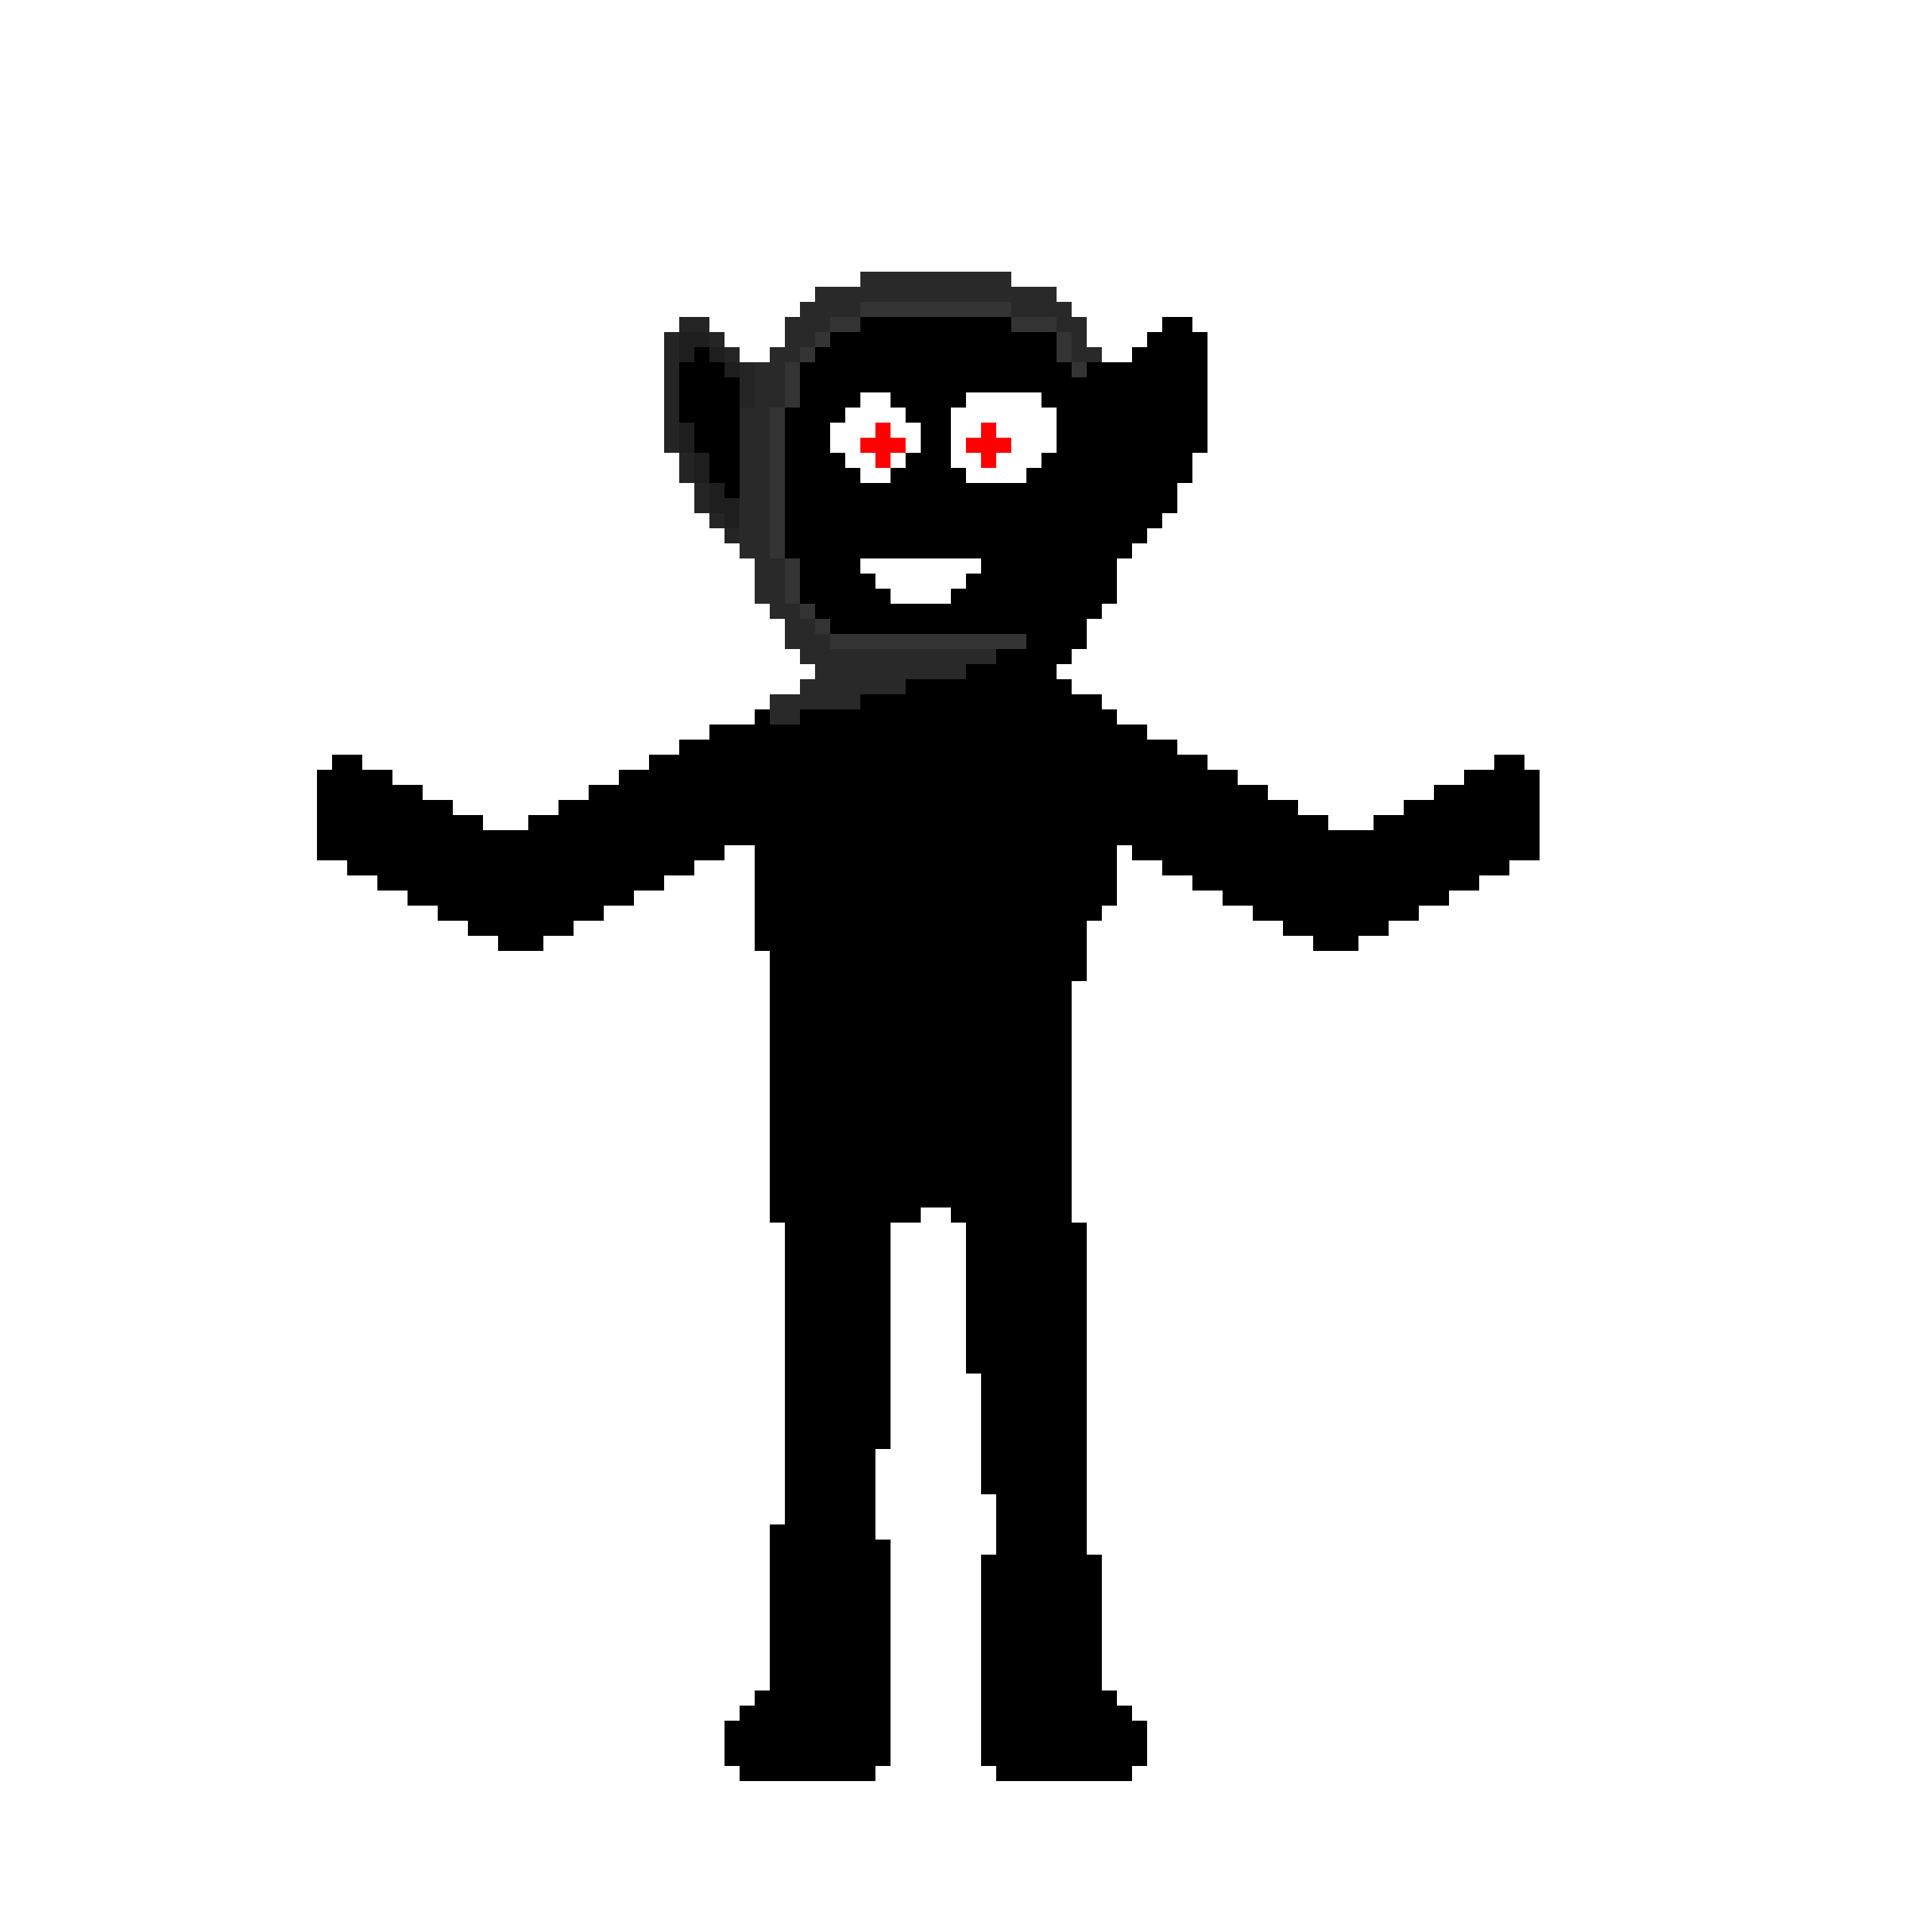 Okay so from now on I am trying to make EVERY SLENDYTUBBY IN SLENDYTUBBIES  3 in the FNF style. Day 1: Shadow Tubby! : r/FridayNightFunkin